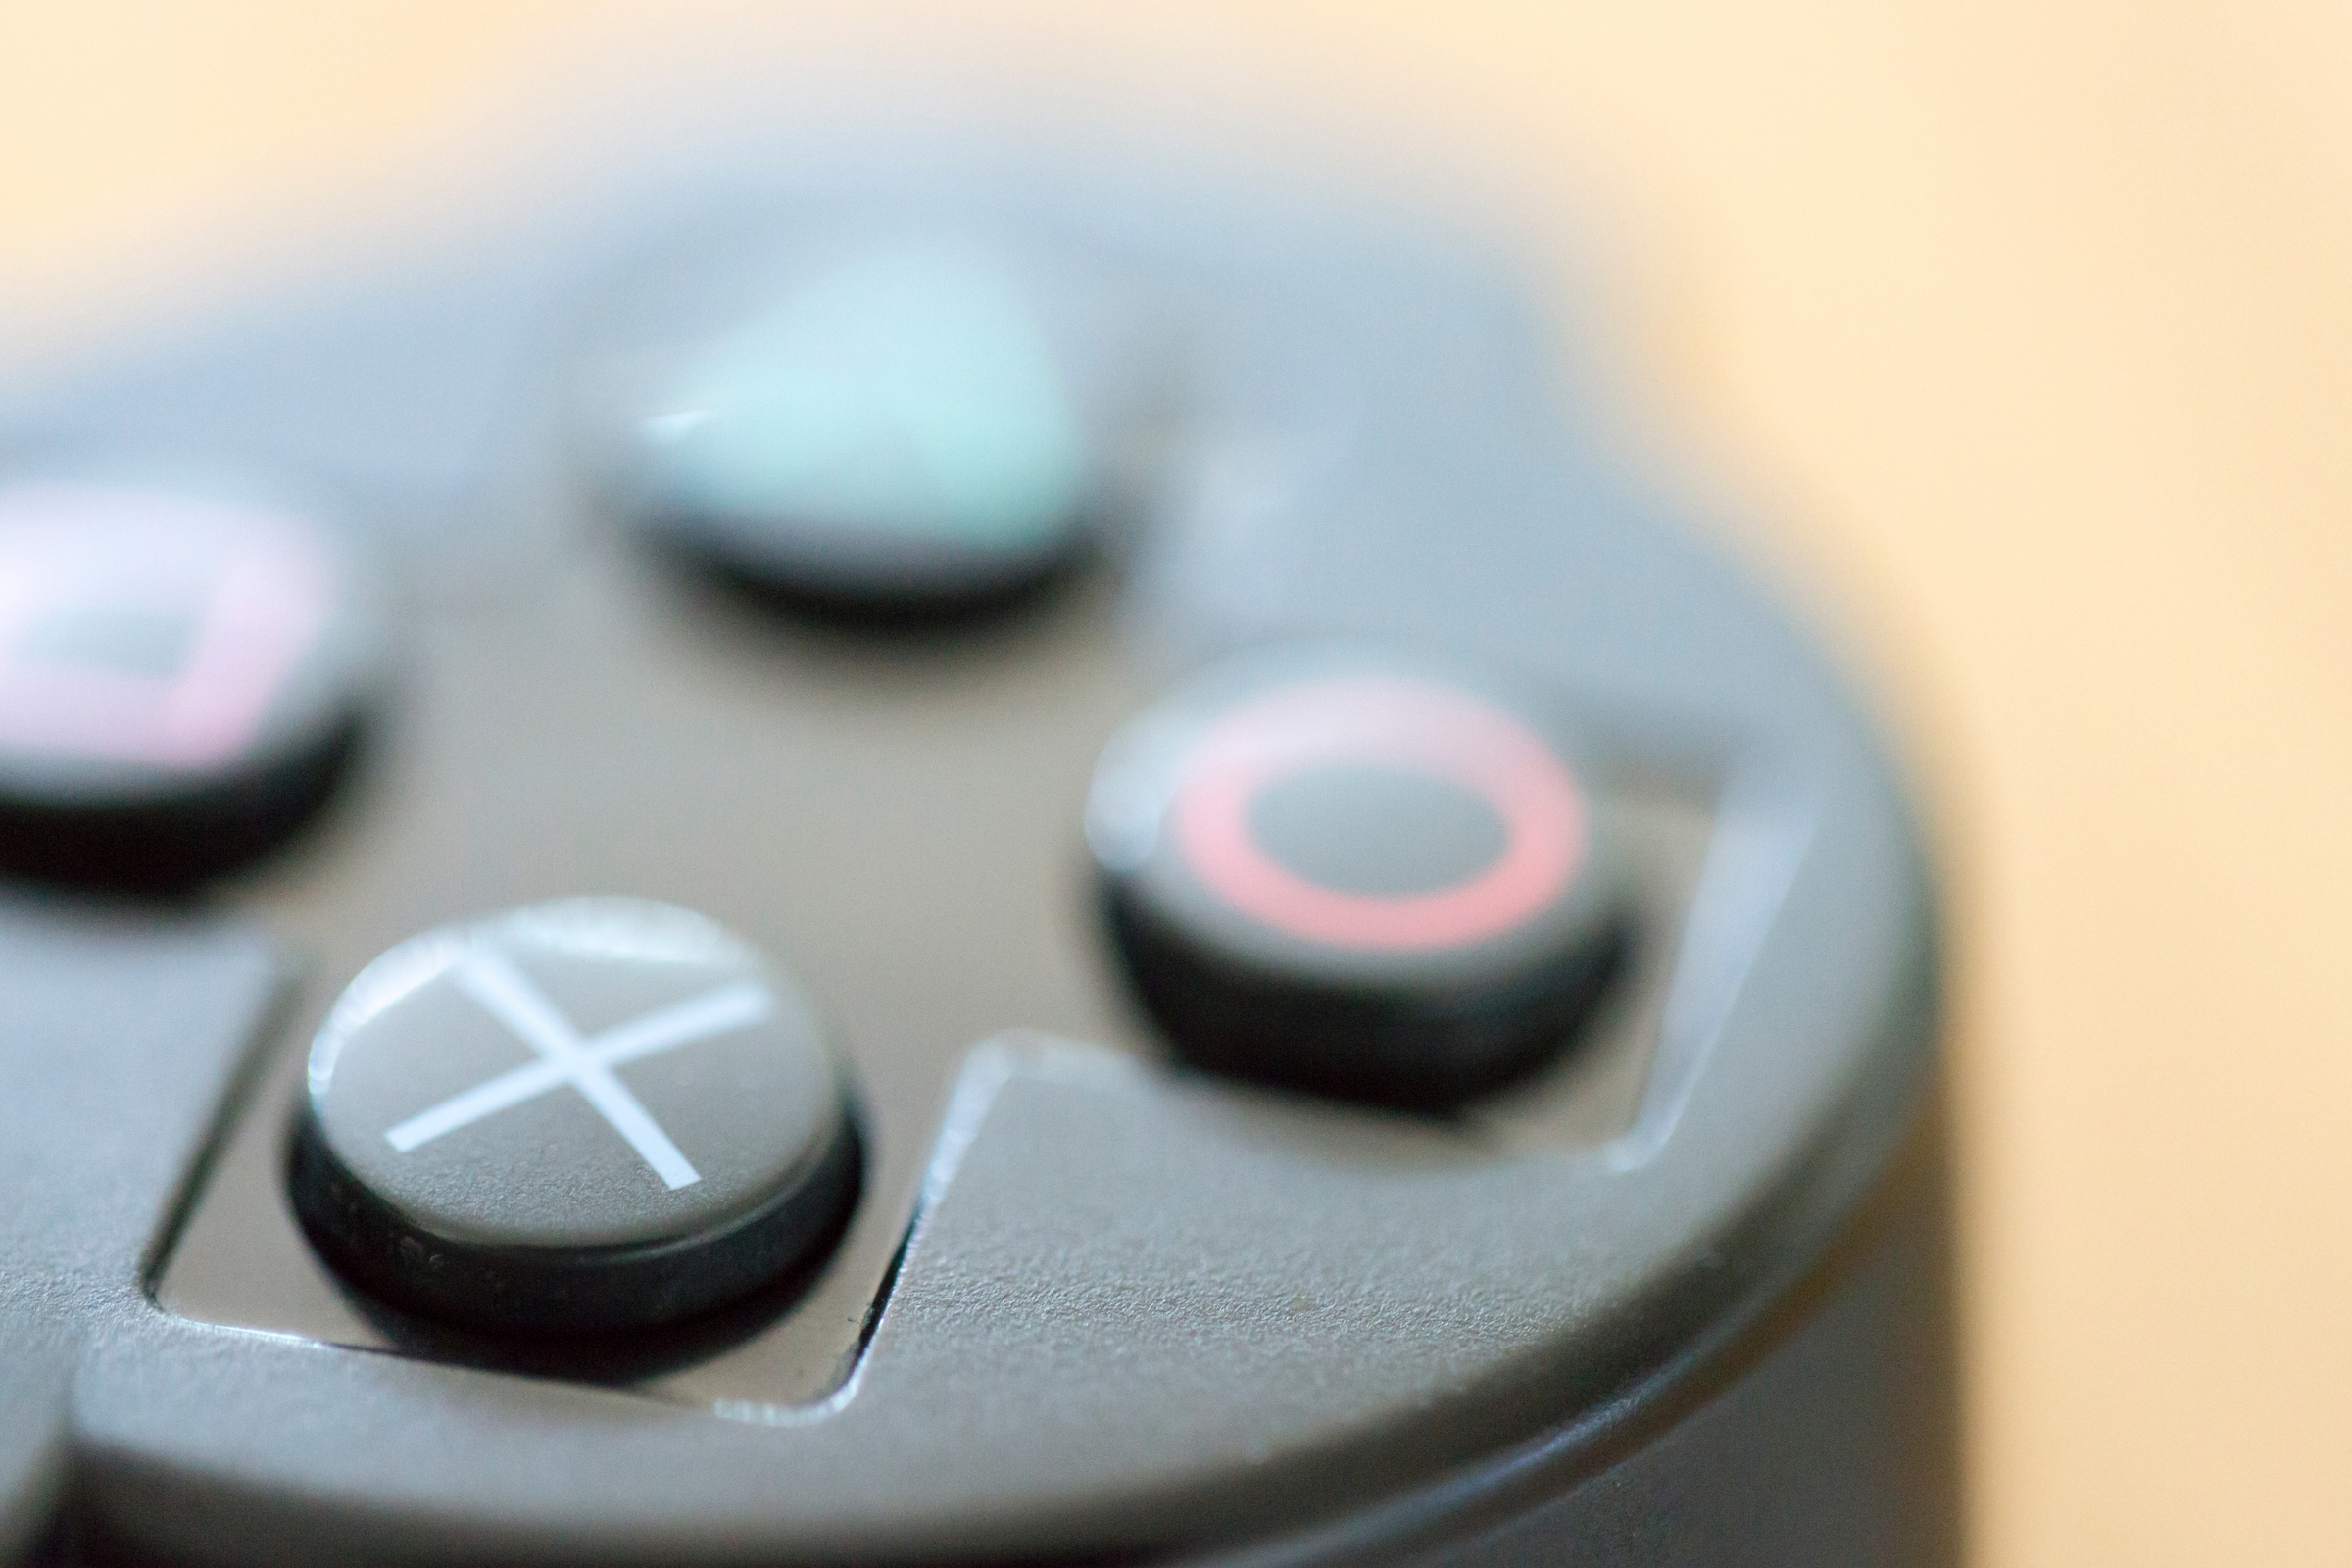 a close up view of the four main buttons on a video game controller